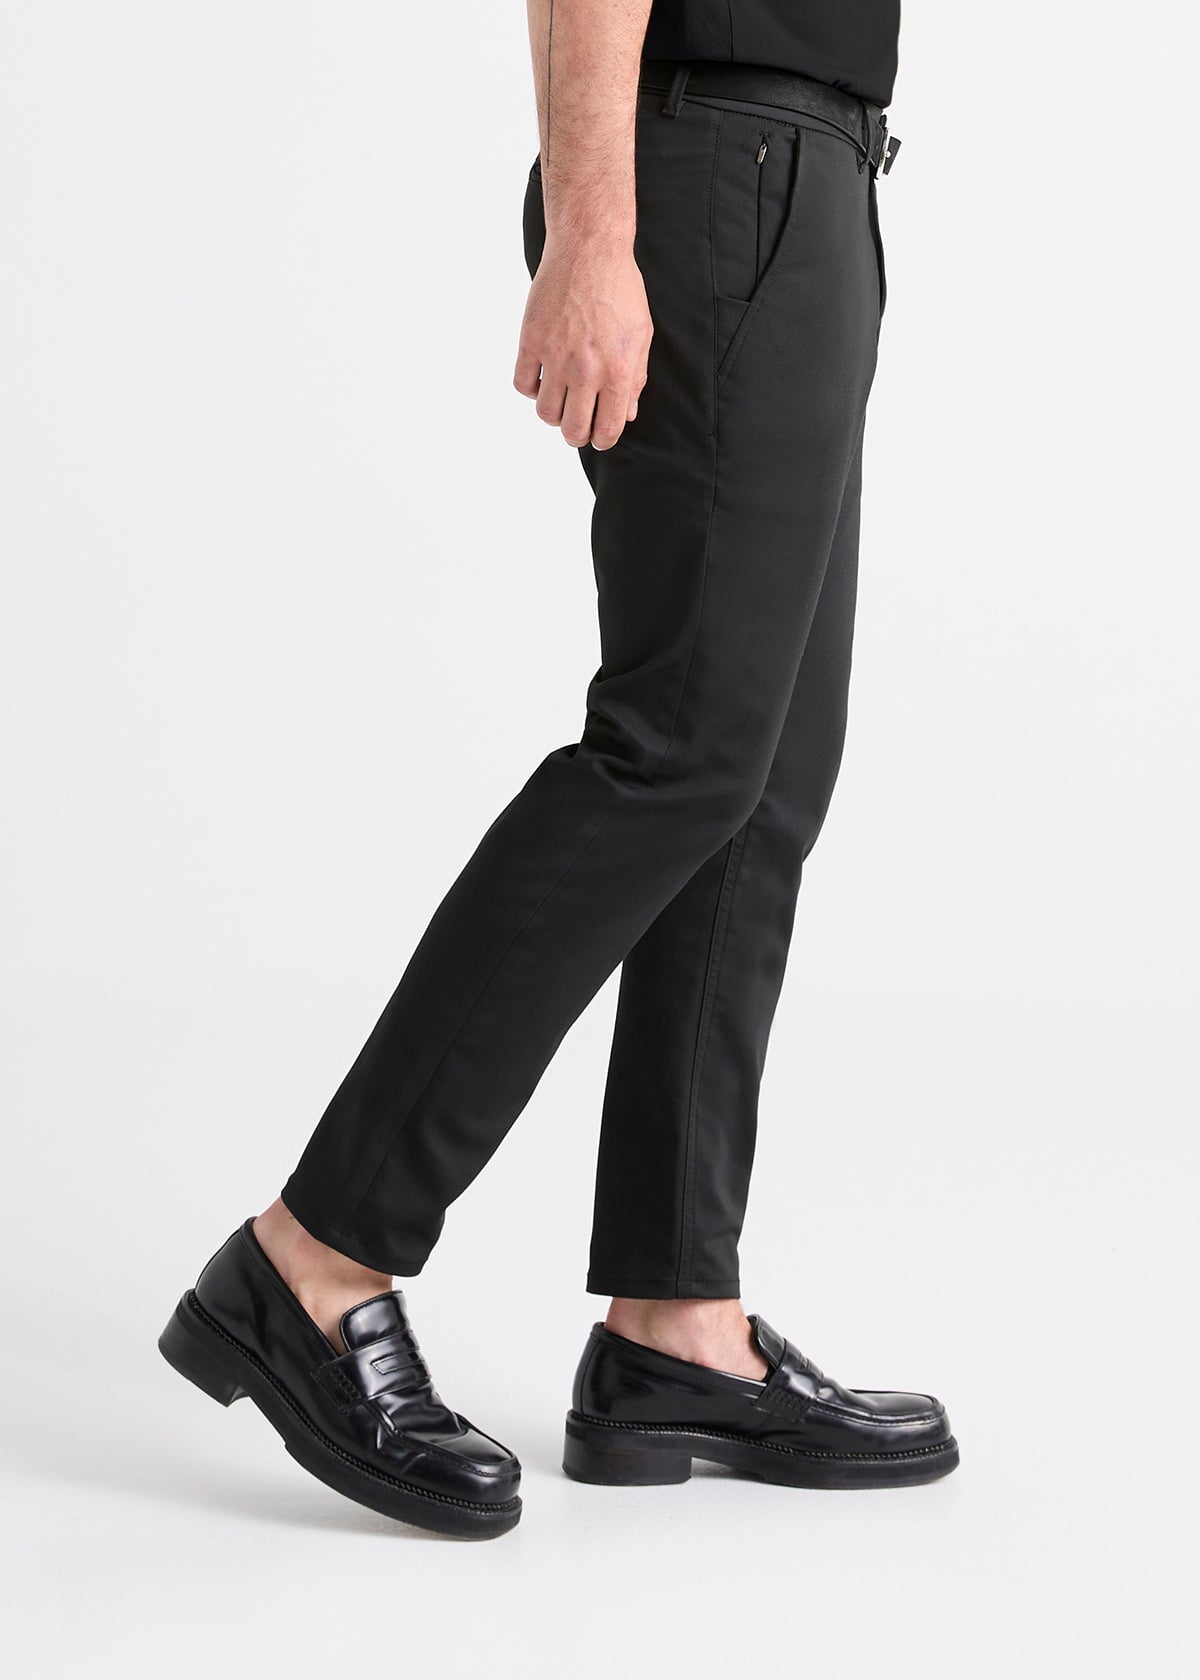 ASOS DESIGN Tall smart tapered pants in black